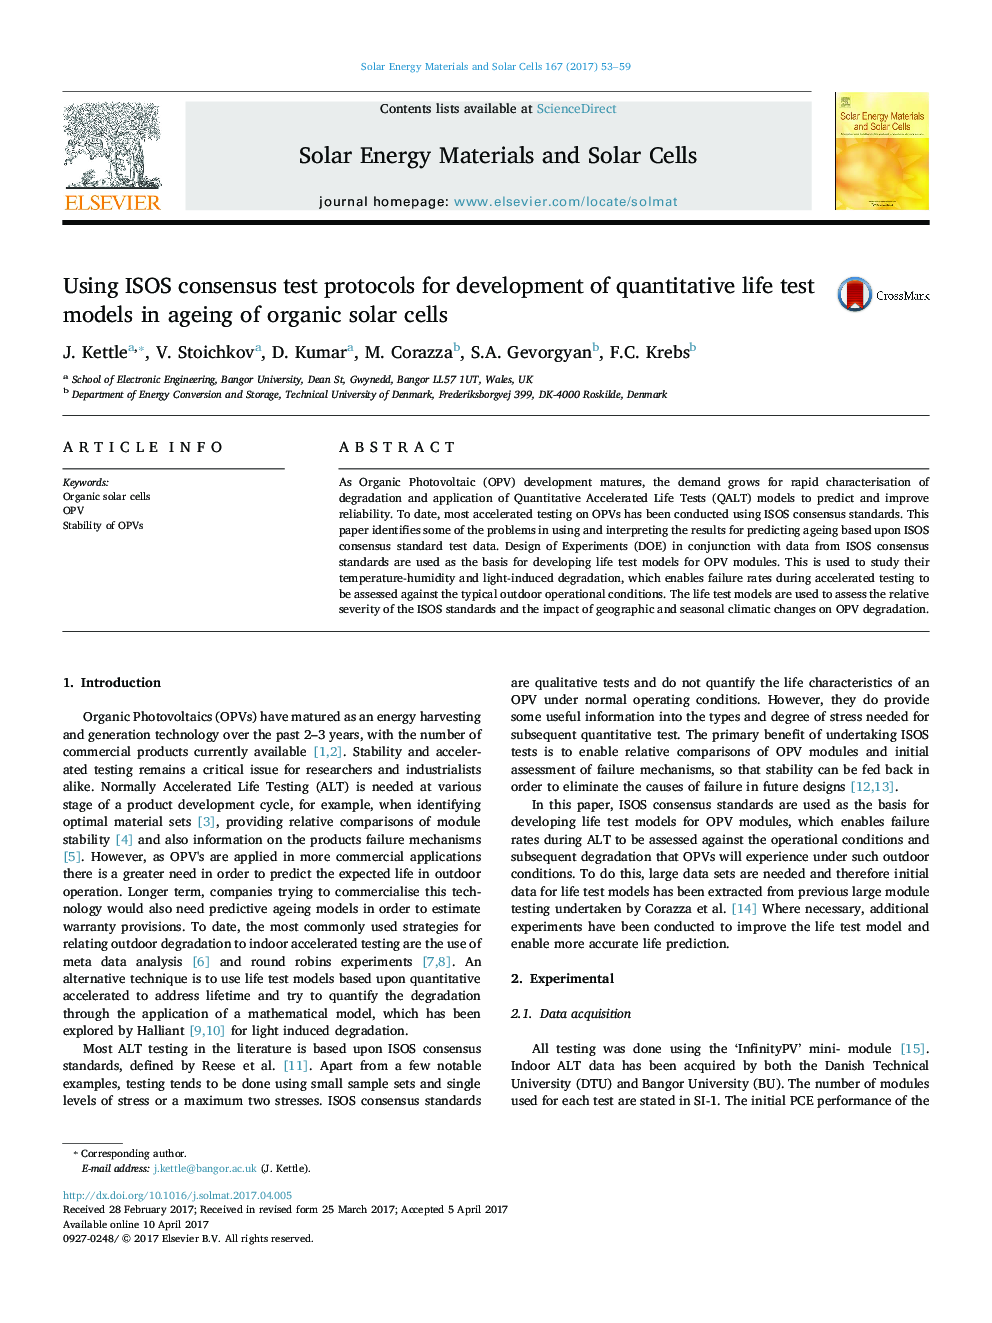 Using ISOS consensus test protocols for development of quantitative life test models in ageing of organic solar cells